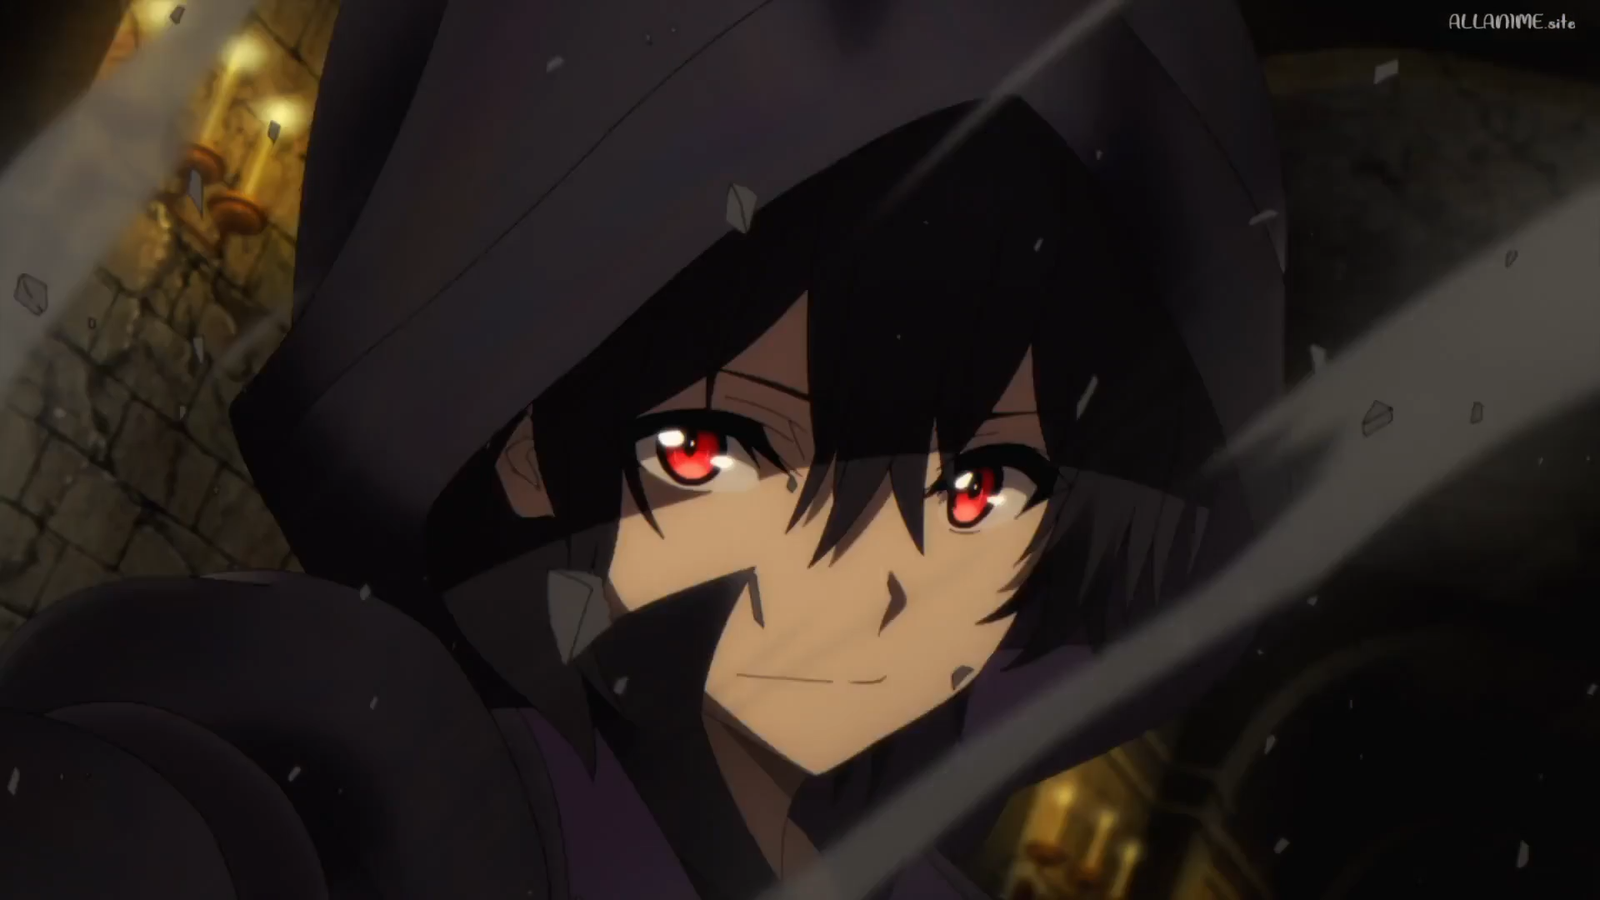 The Eminence in Shadow Anime Reveals Teaser Trailer and Visual